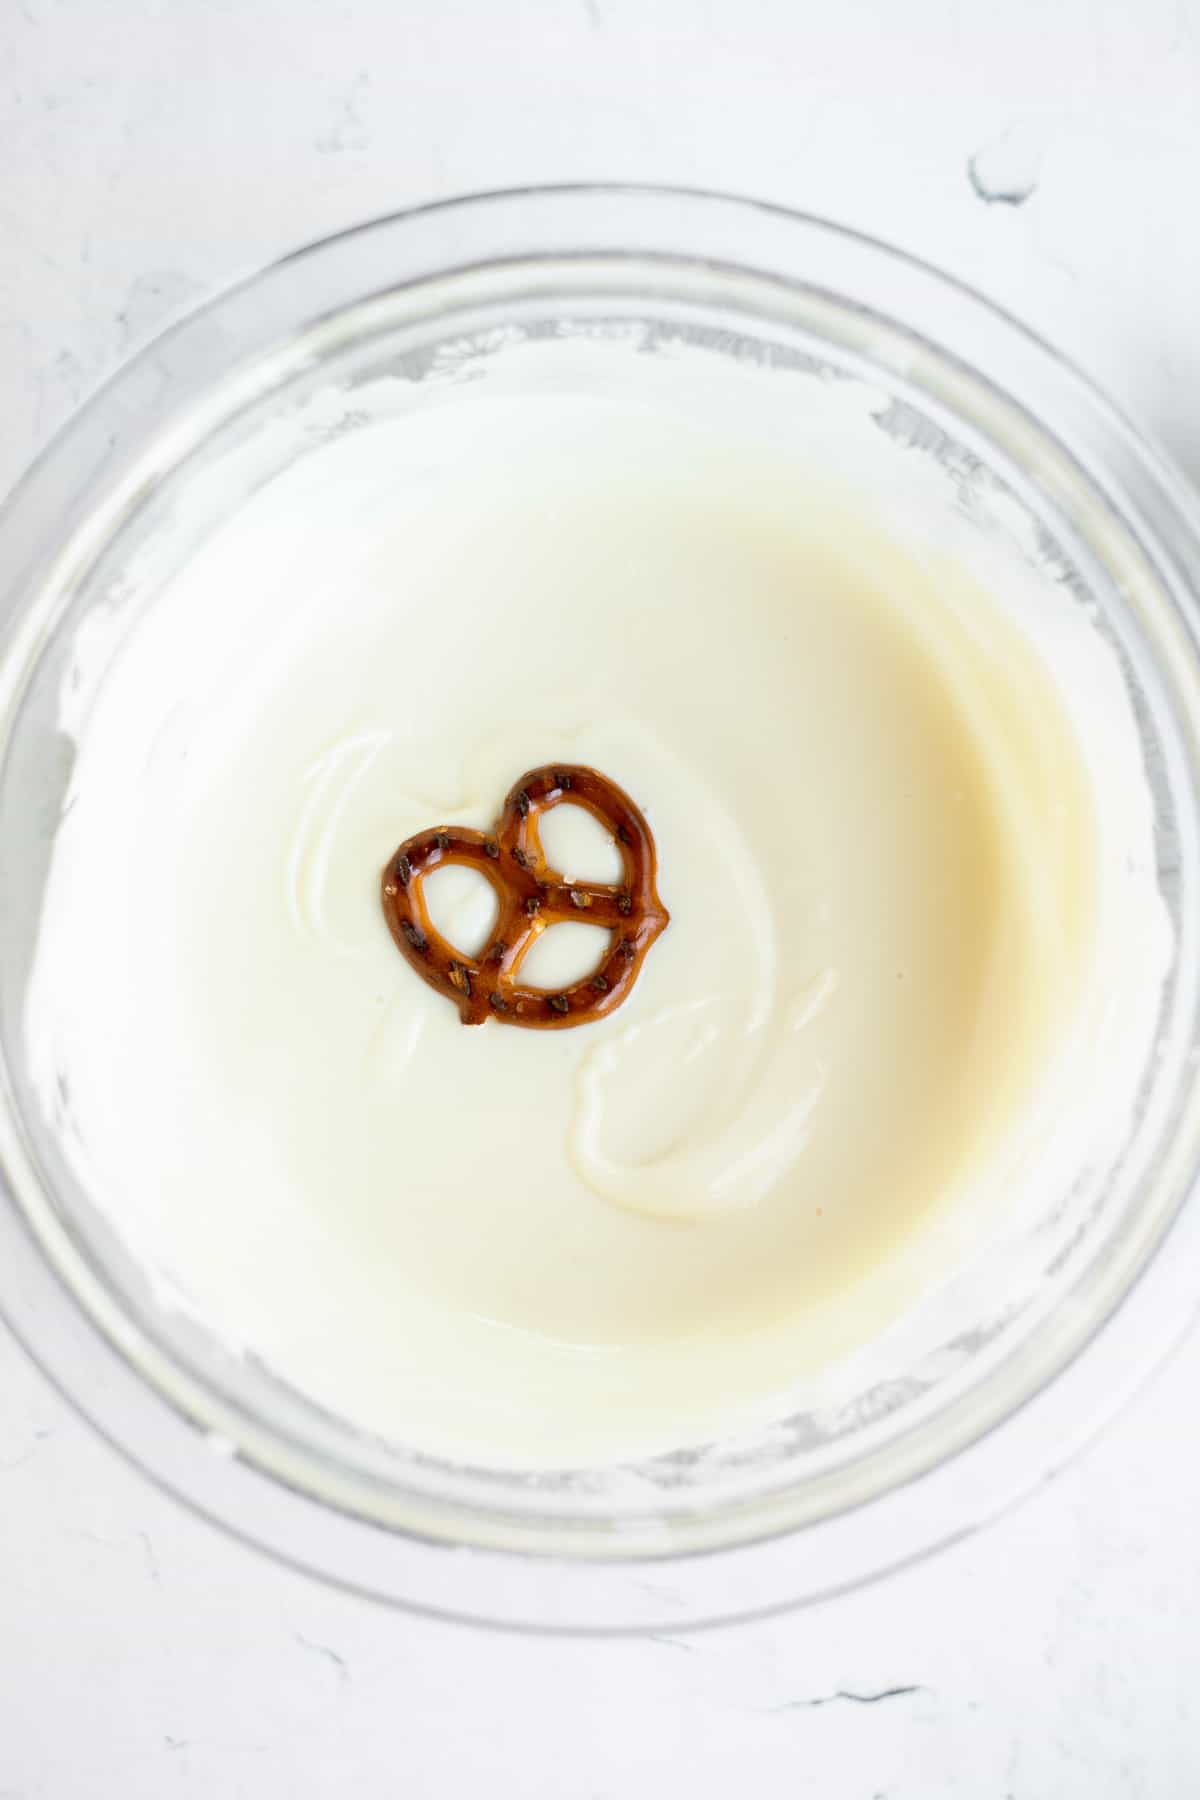 mini pretzel twist in a small bowl of melted white chocolate.